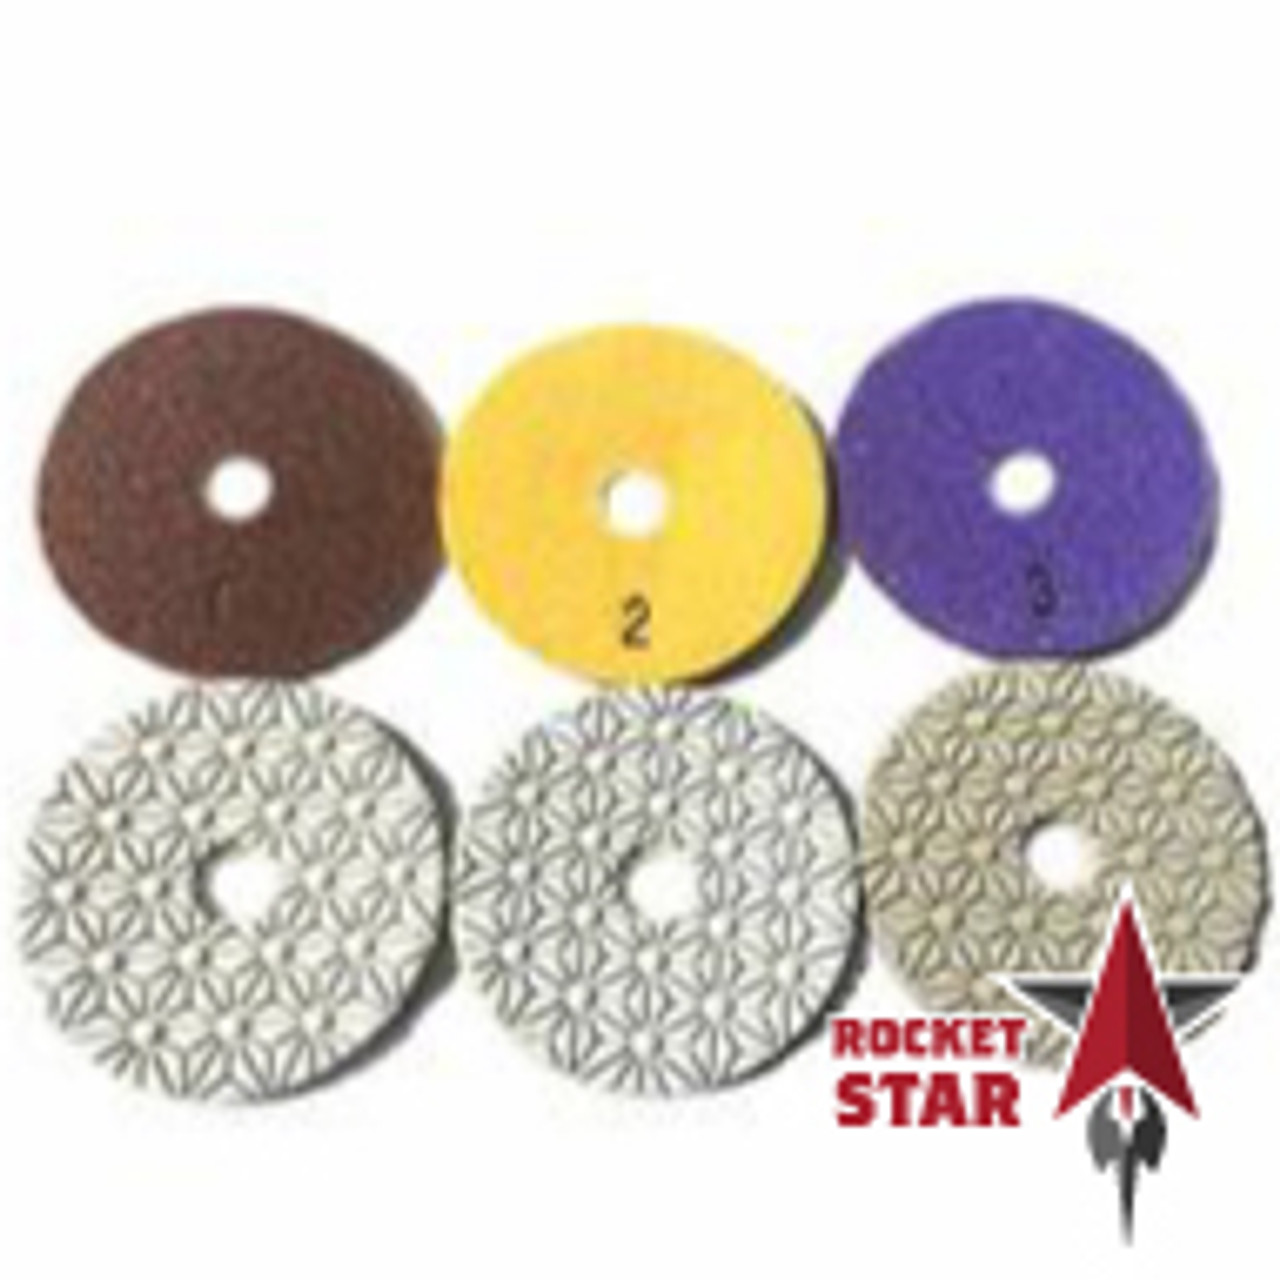 Rocket Star 3 Step Polishing Pads for use on Granite, Quartz and Natural  Stone Surfaces.